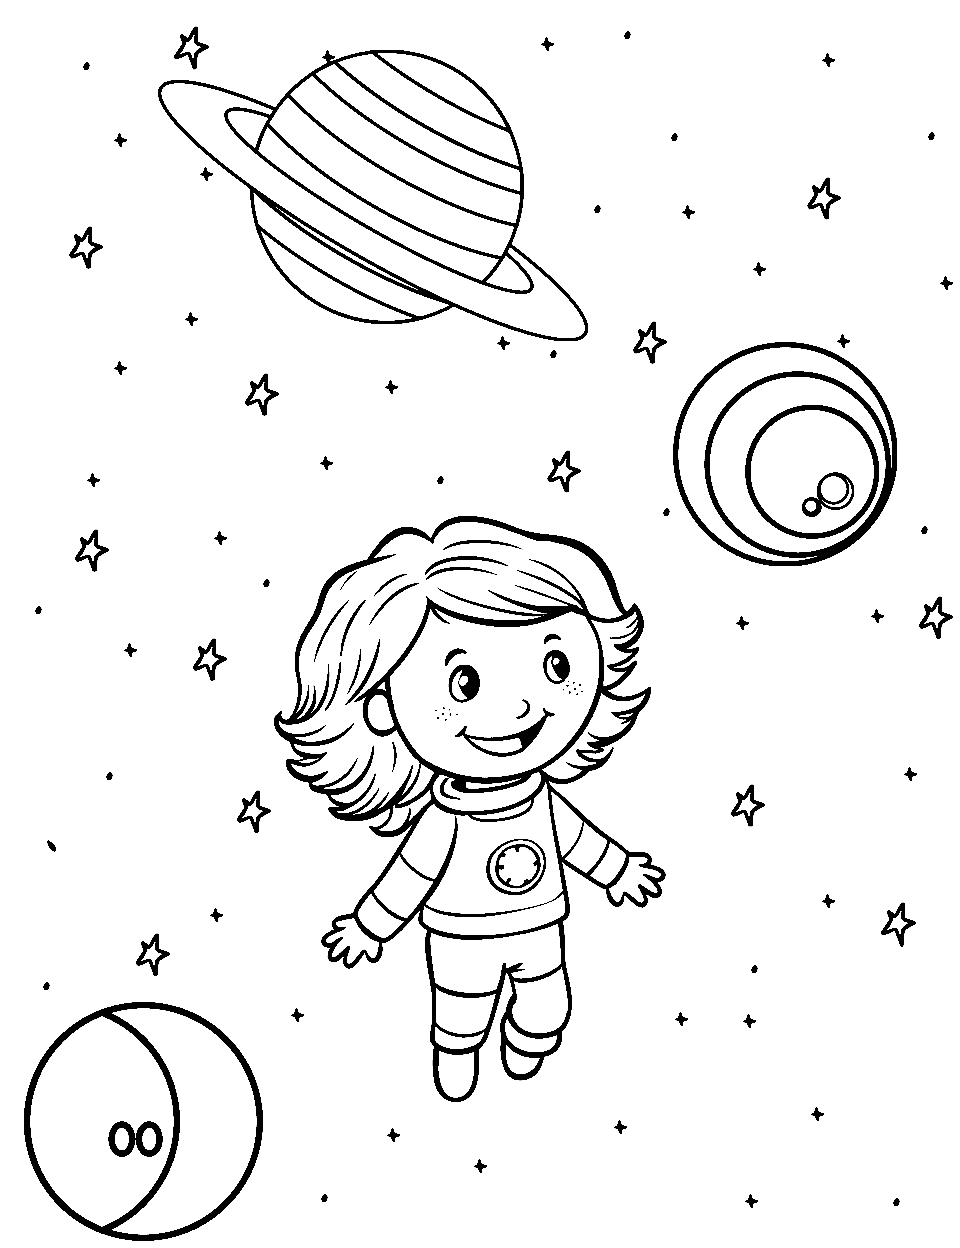 Cosmic Dream Coloring Page - A kid dreaming about a cosmic universe and floating among the stars and planets.